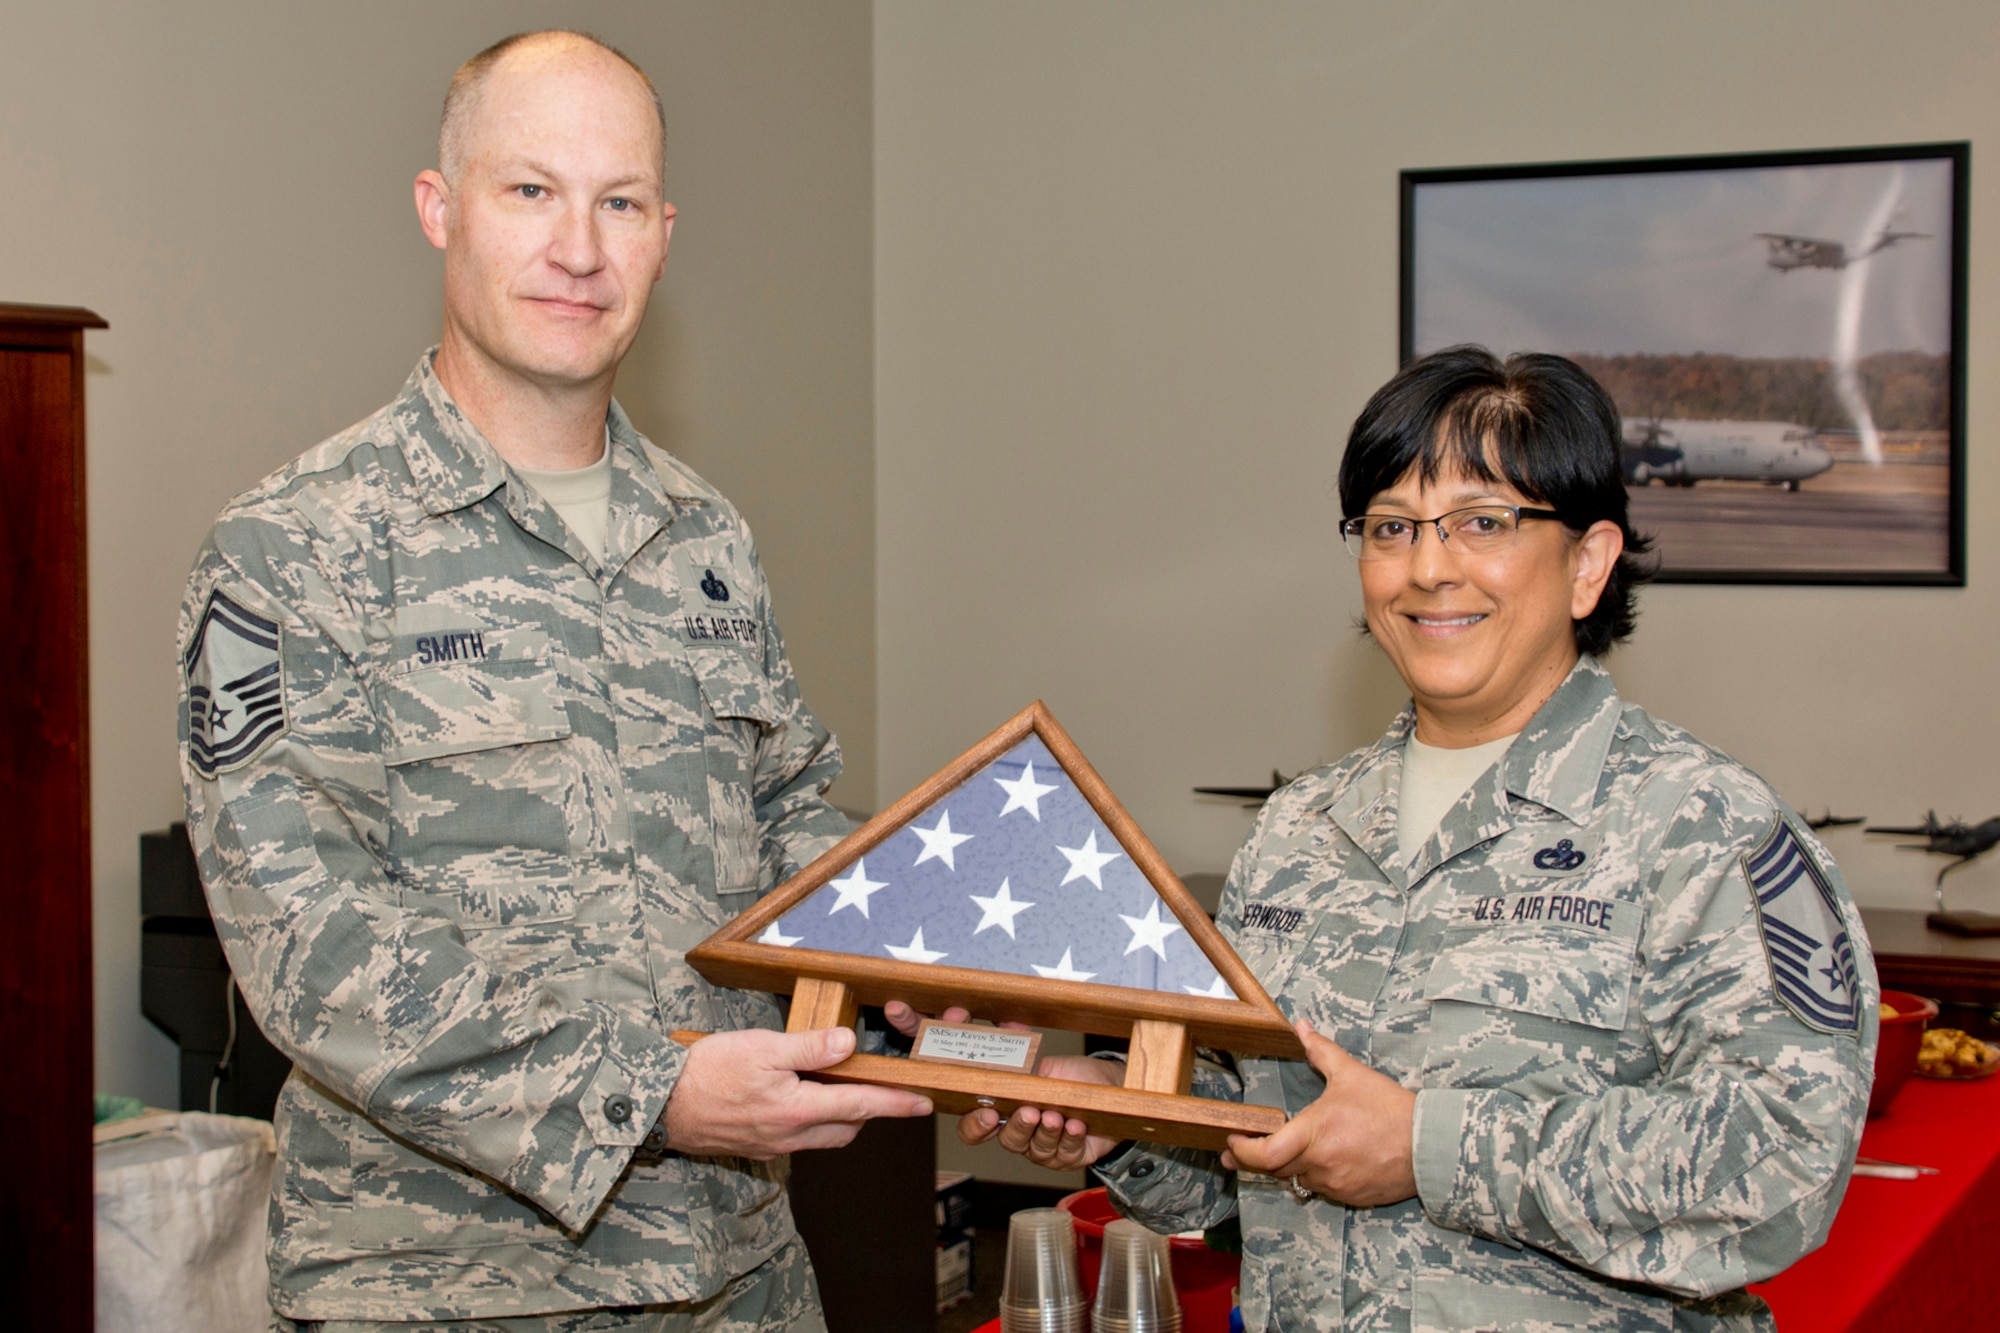 U.S. Air Force Reserve Chief Master Sgt. Cynthia Underwood, superintendent, 96th Aerial Port Squadron, poses for a photo with Senior Master Sgt. Kevin Smith, senior non-commissioned officer for sustainment services, 913th Force Support Squadron, Aug. 21, 2017, at Little Rock Air Force Base, Ark. Smith will retire after 23 years of faithful military service. (U.S. Air Force photo by Master Sgt. Jeff Walston/Released)